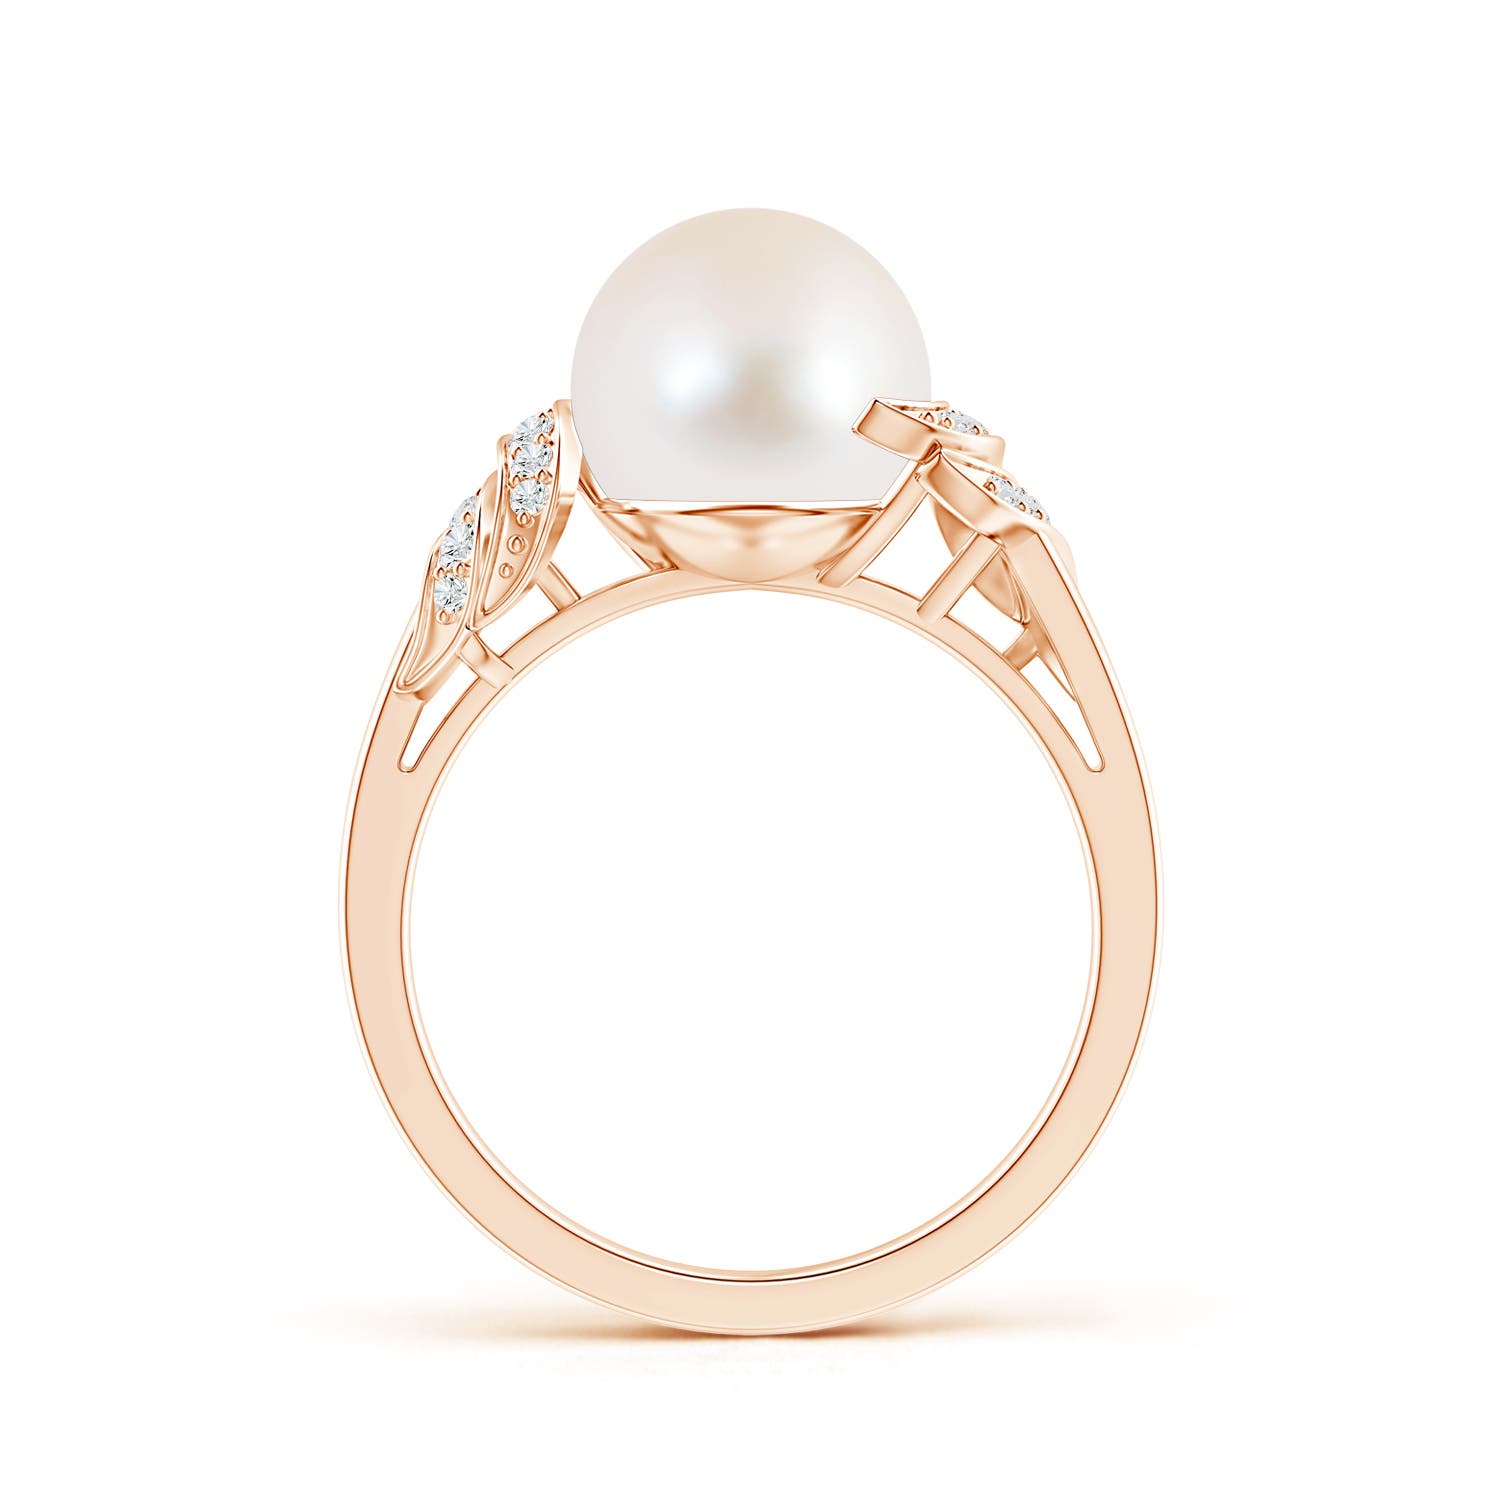 AAA / 5.39 CT / 14 KT Rose Gold